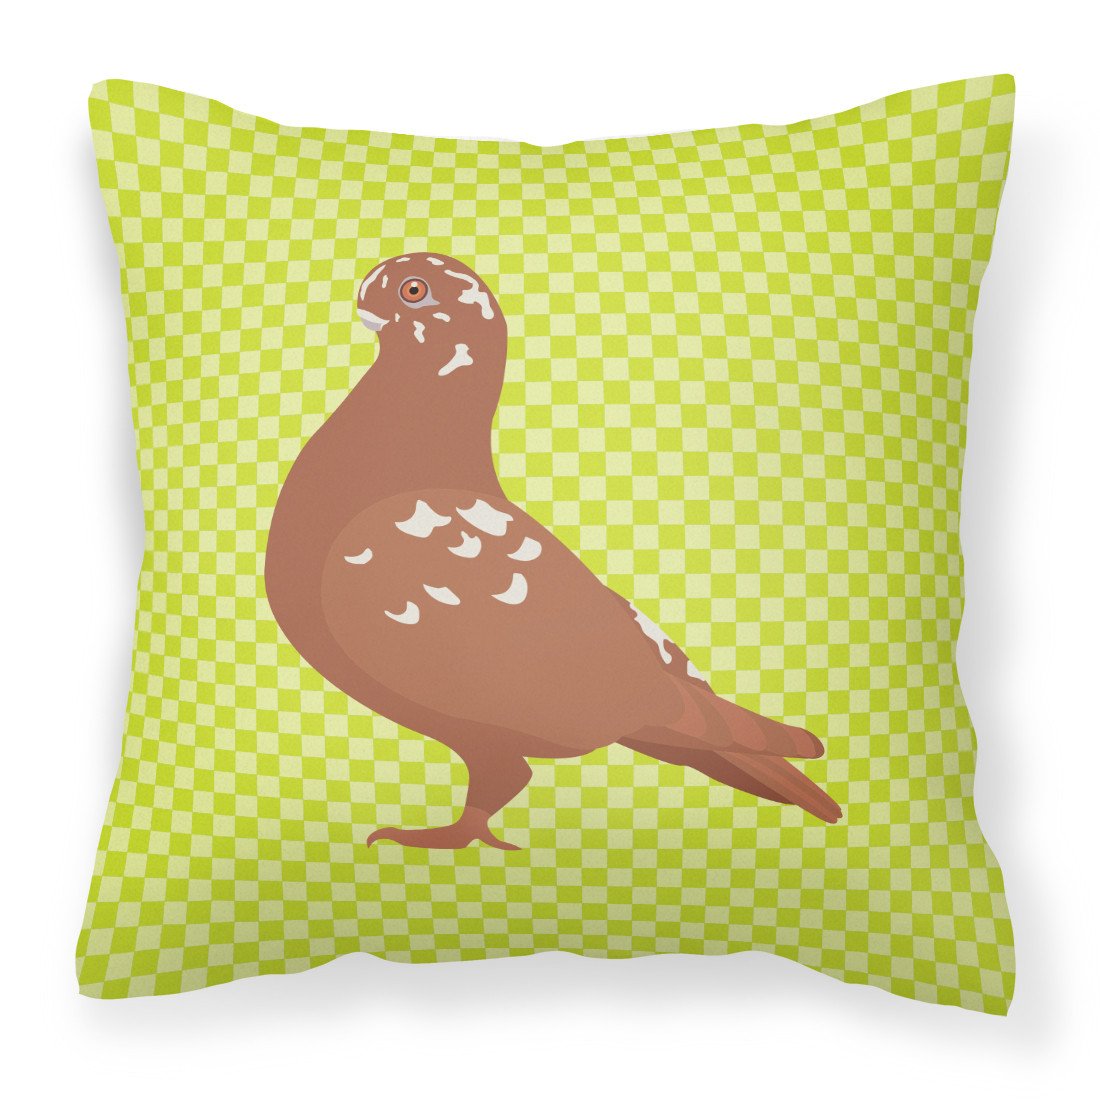 African Owl Pigeon Green Fabric Decorative Pillow BB7779PW1818 by Caroline's Treasures